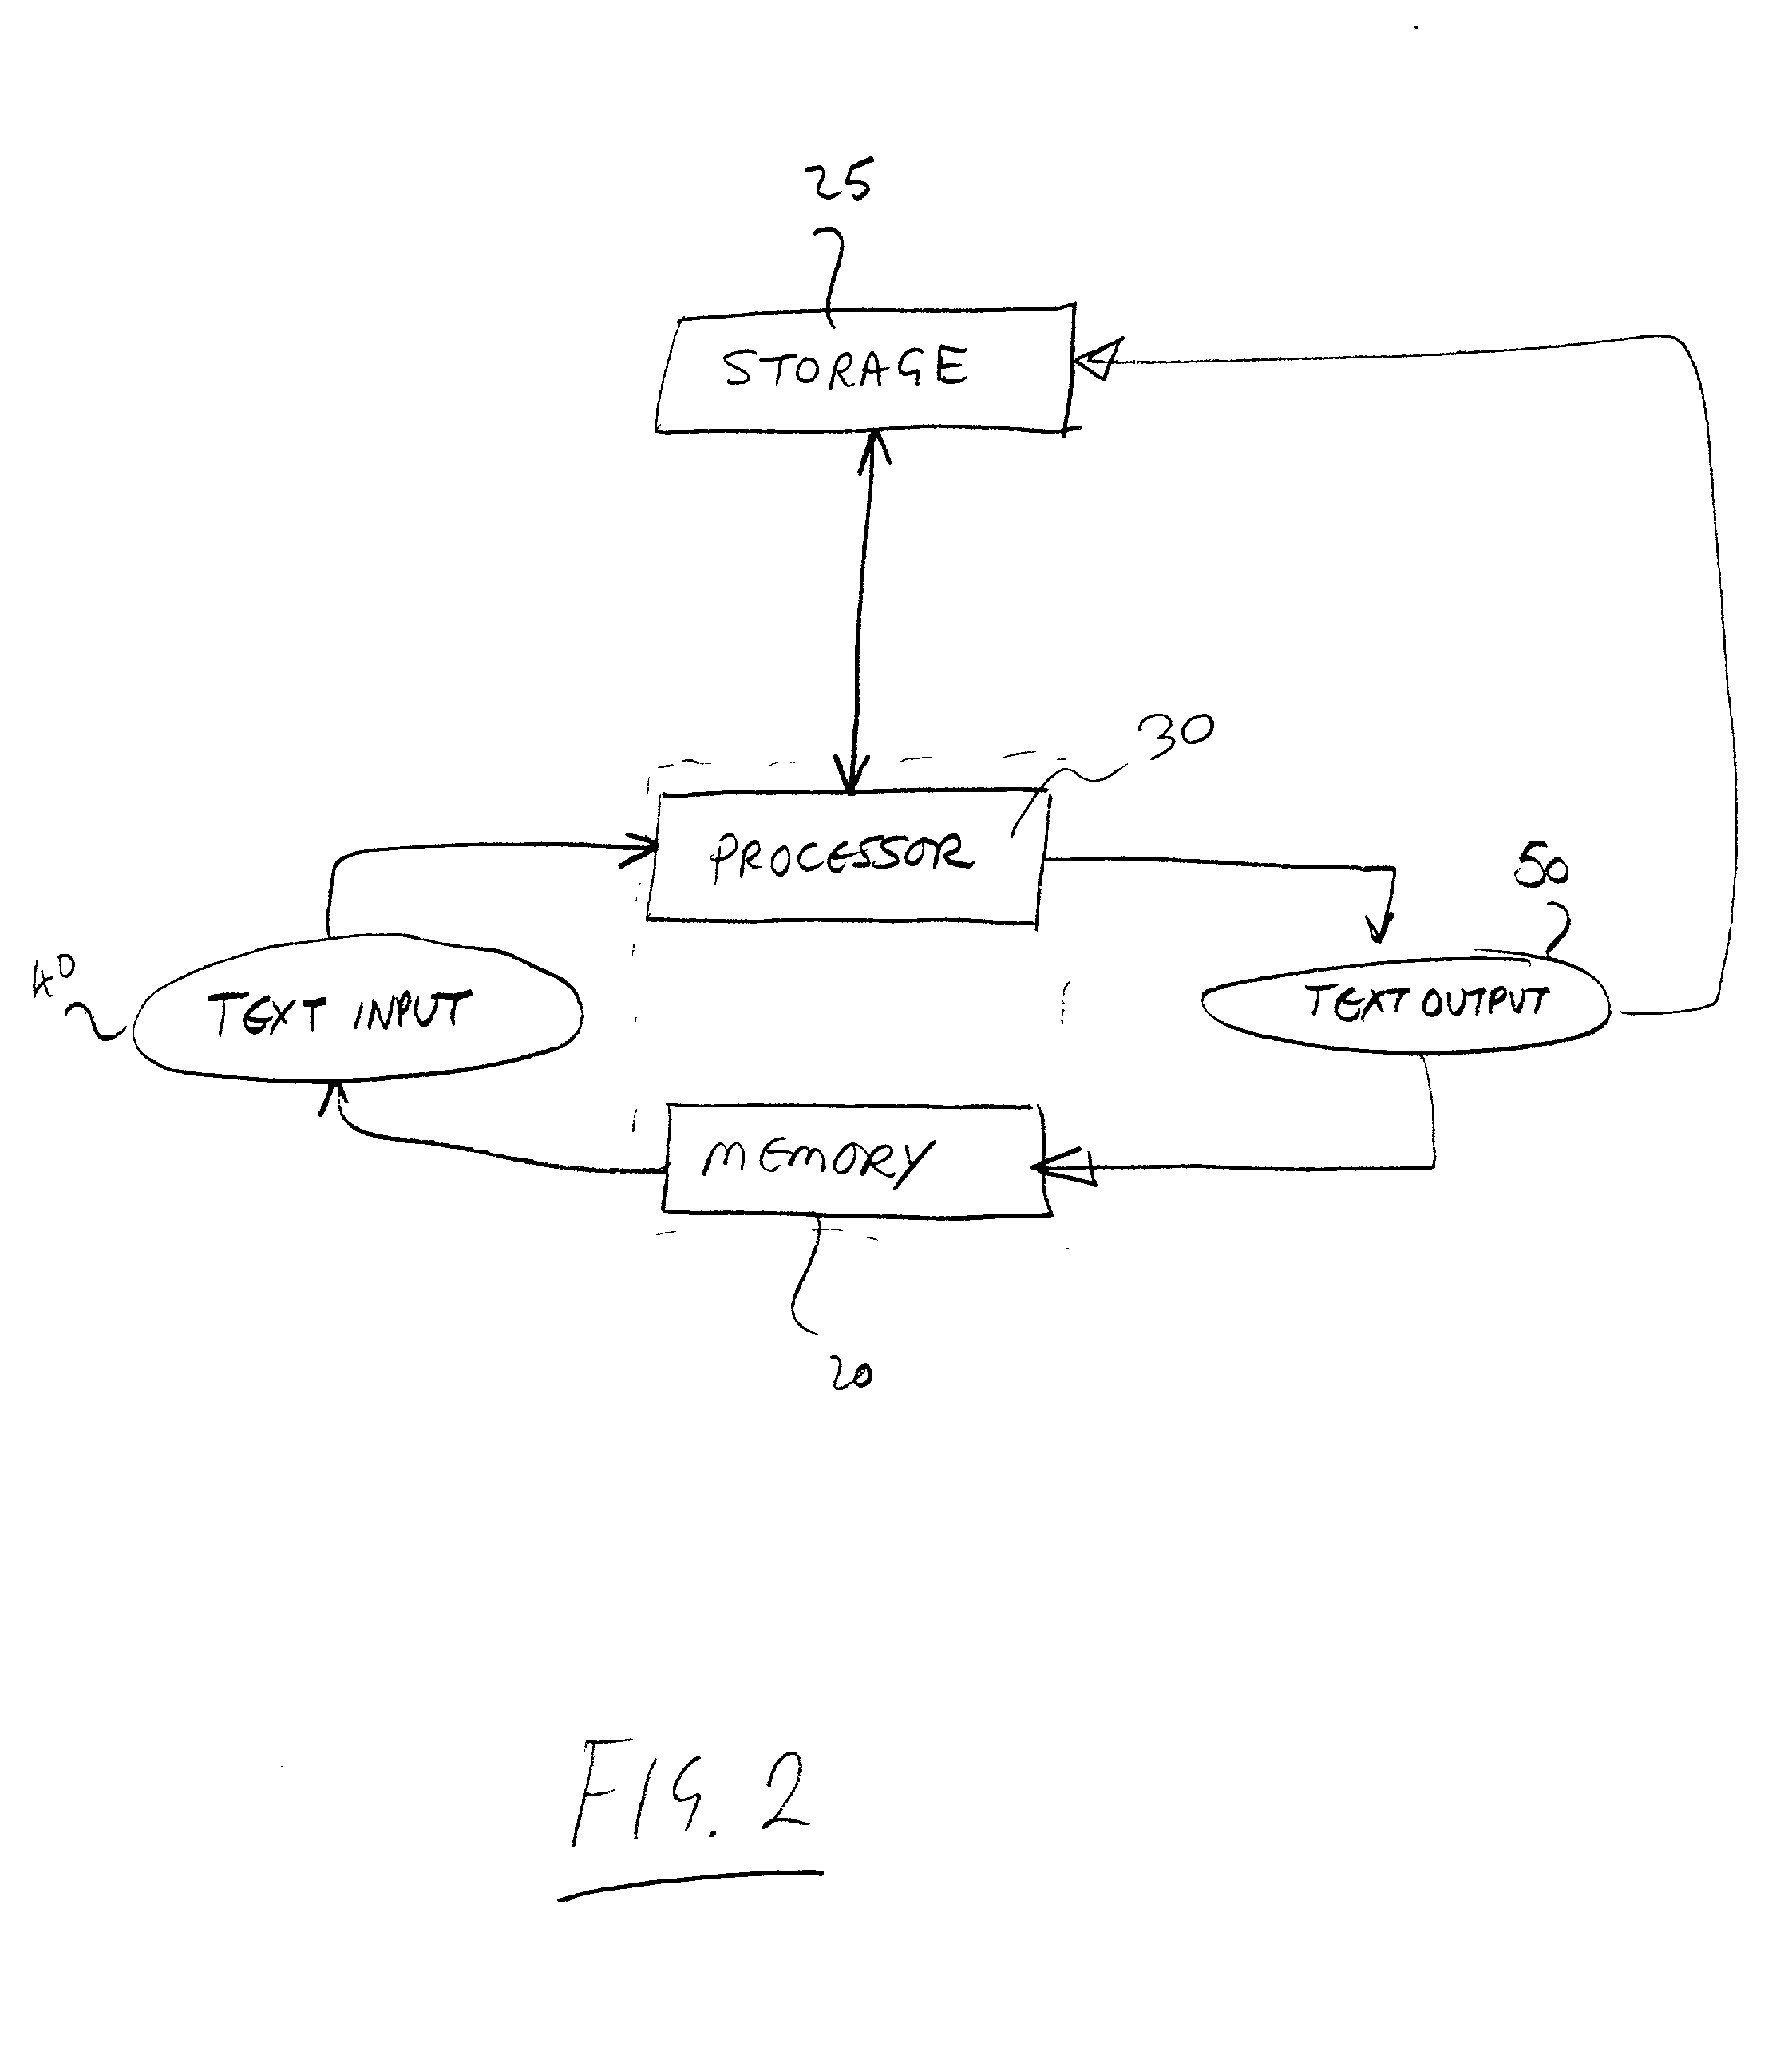 Computer implemented method for reformatting logically complex clauses in an electronic text-based document